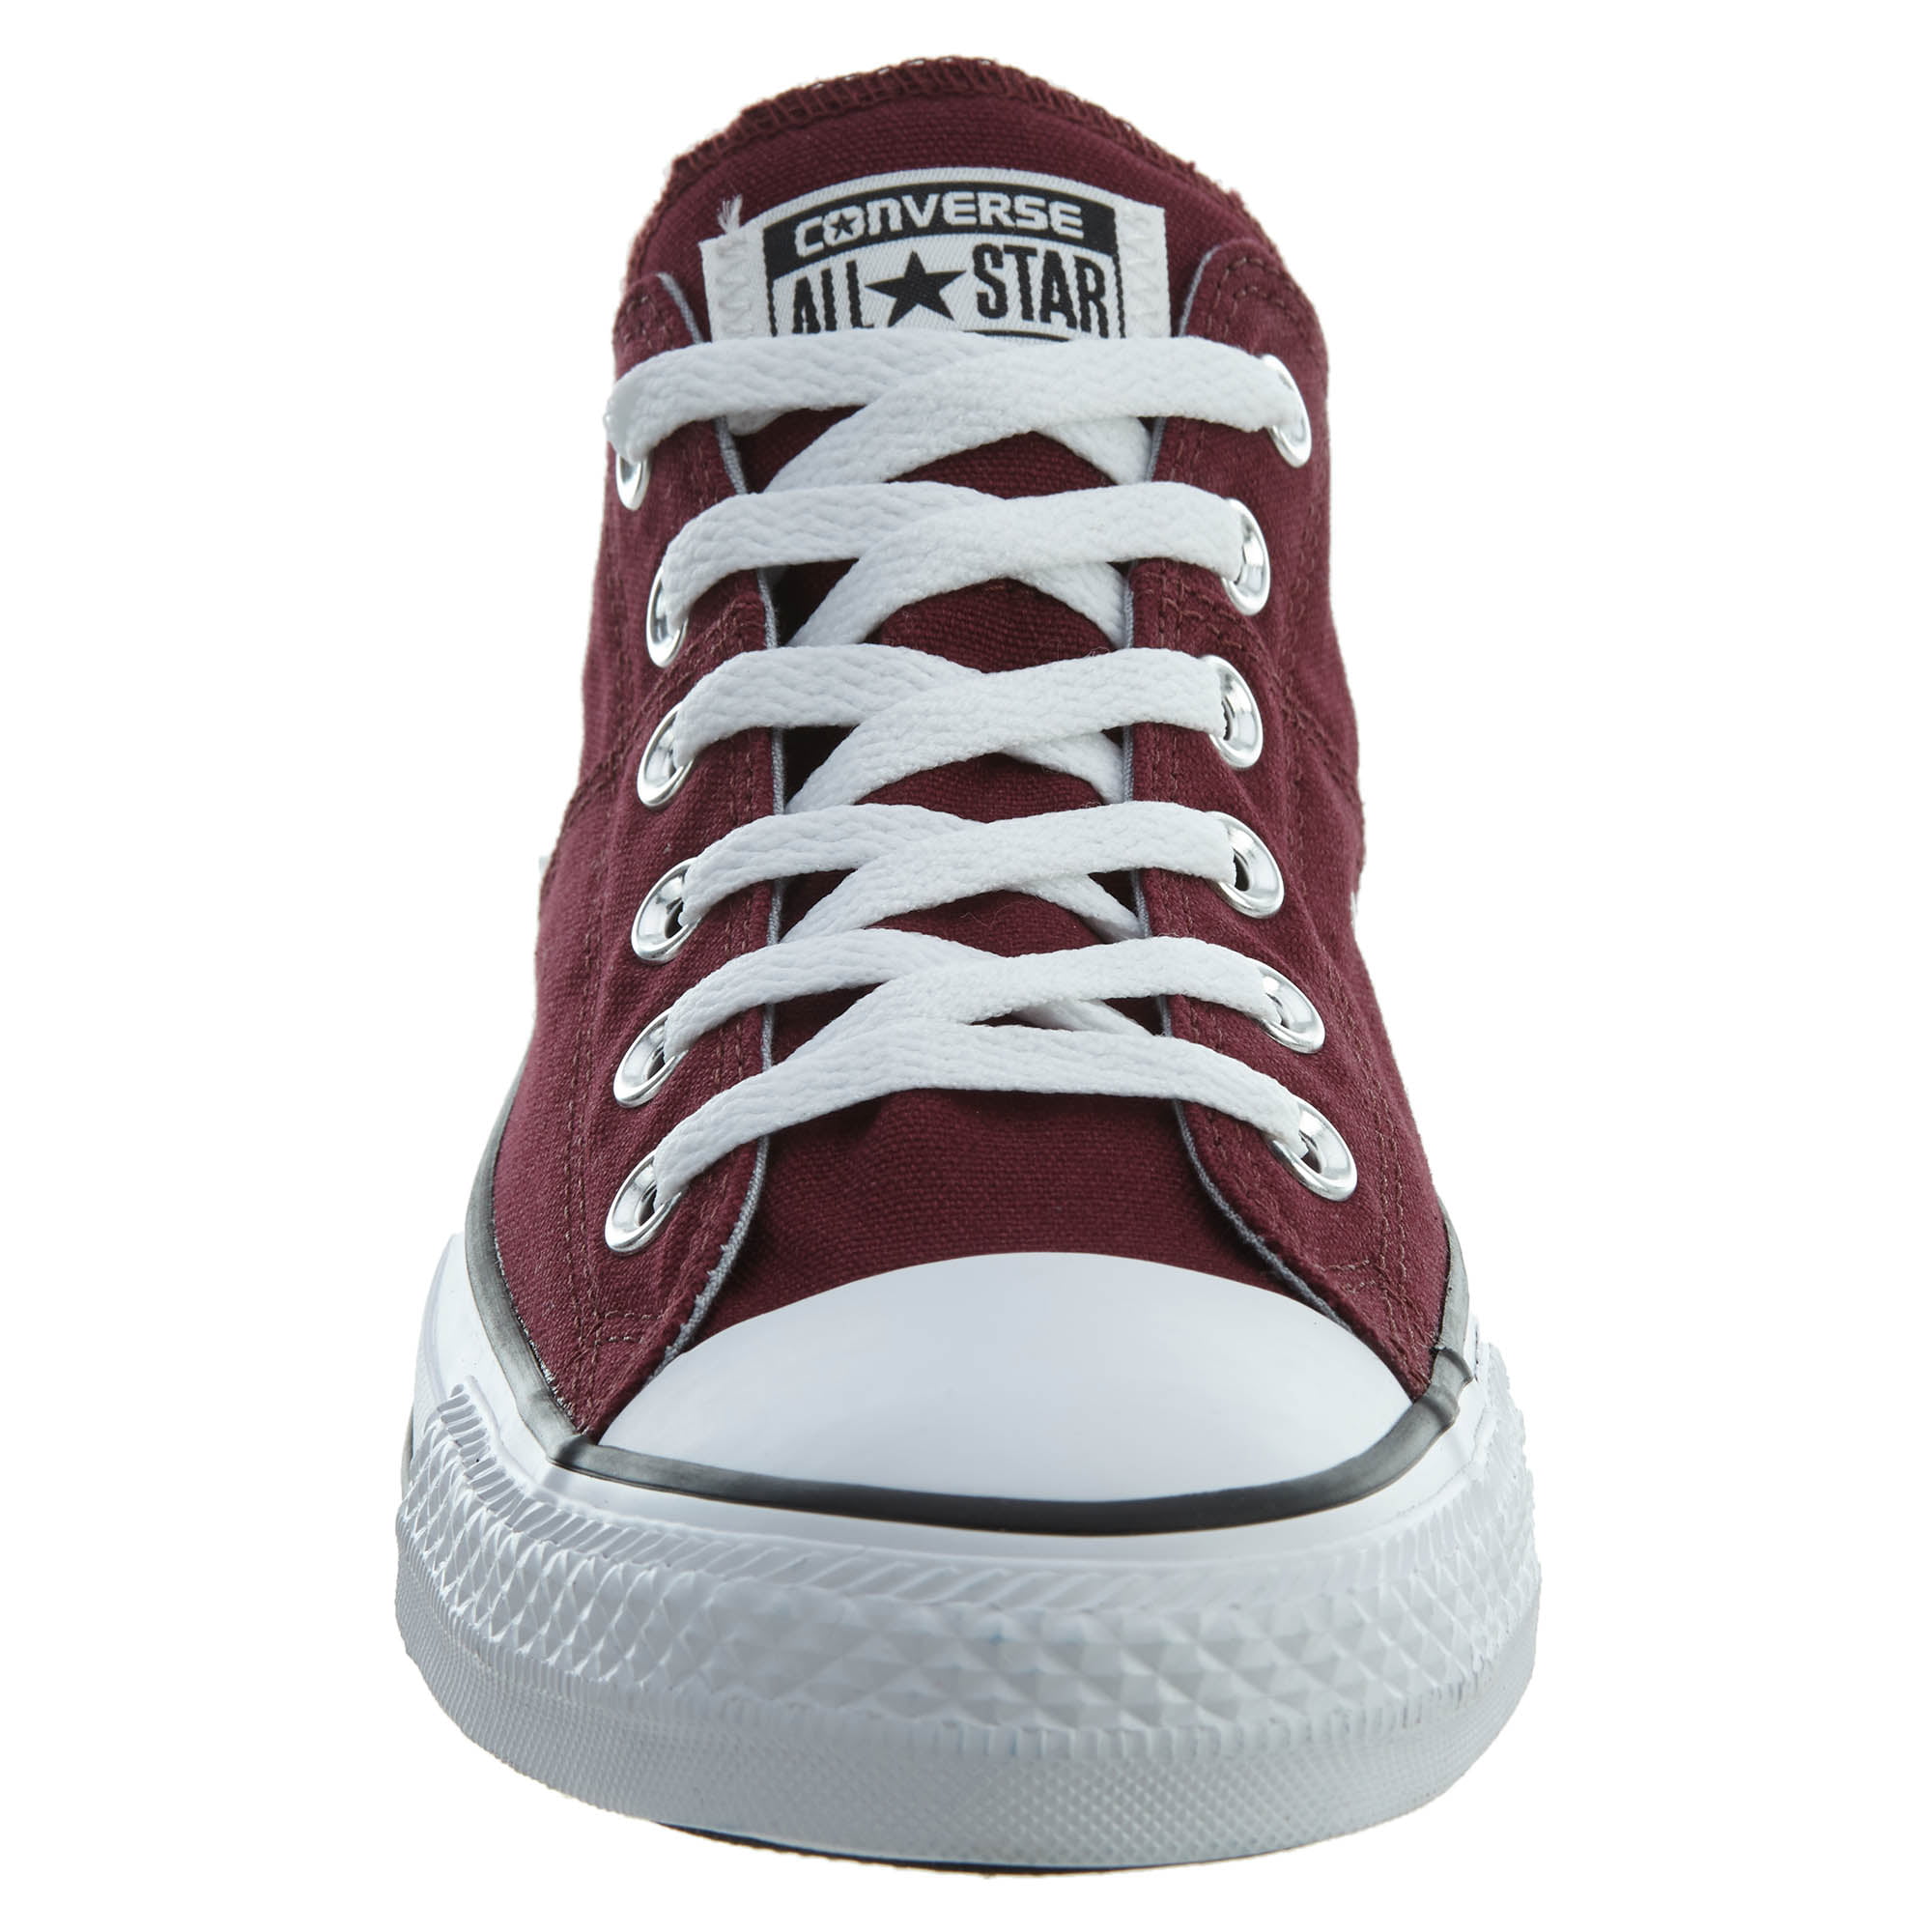 Converse Women's Chuck Taylor All Star Madison Low Top Burgundy White, US  Women's 10 